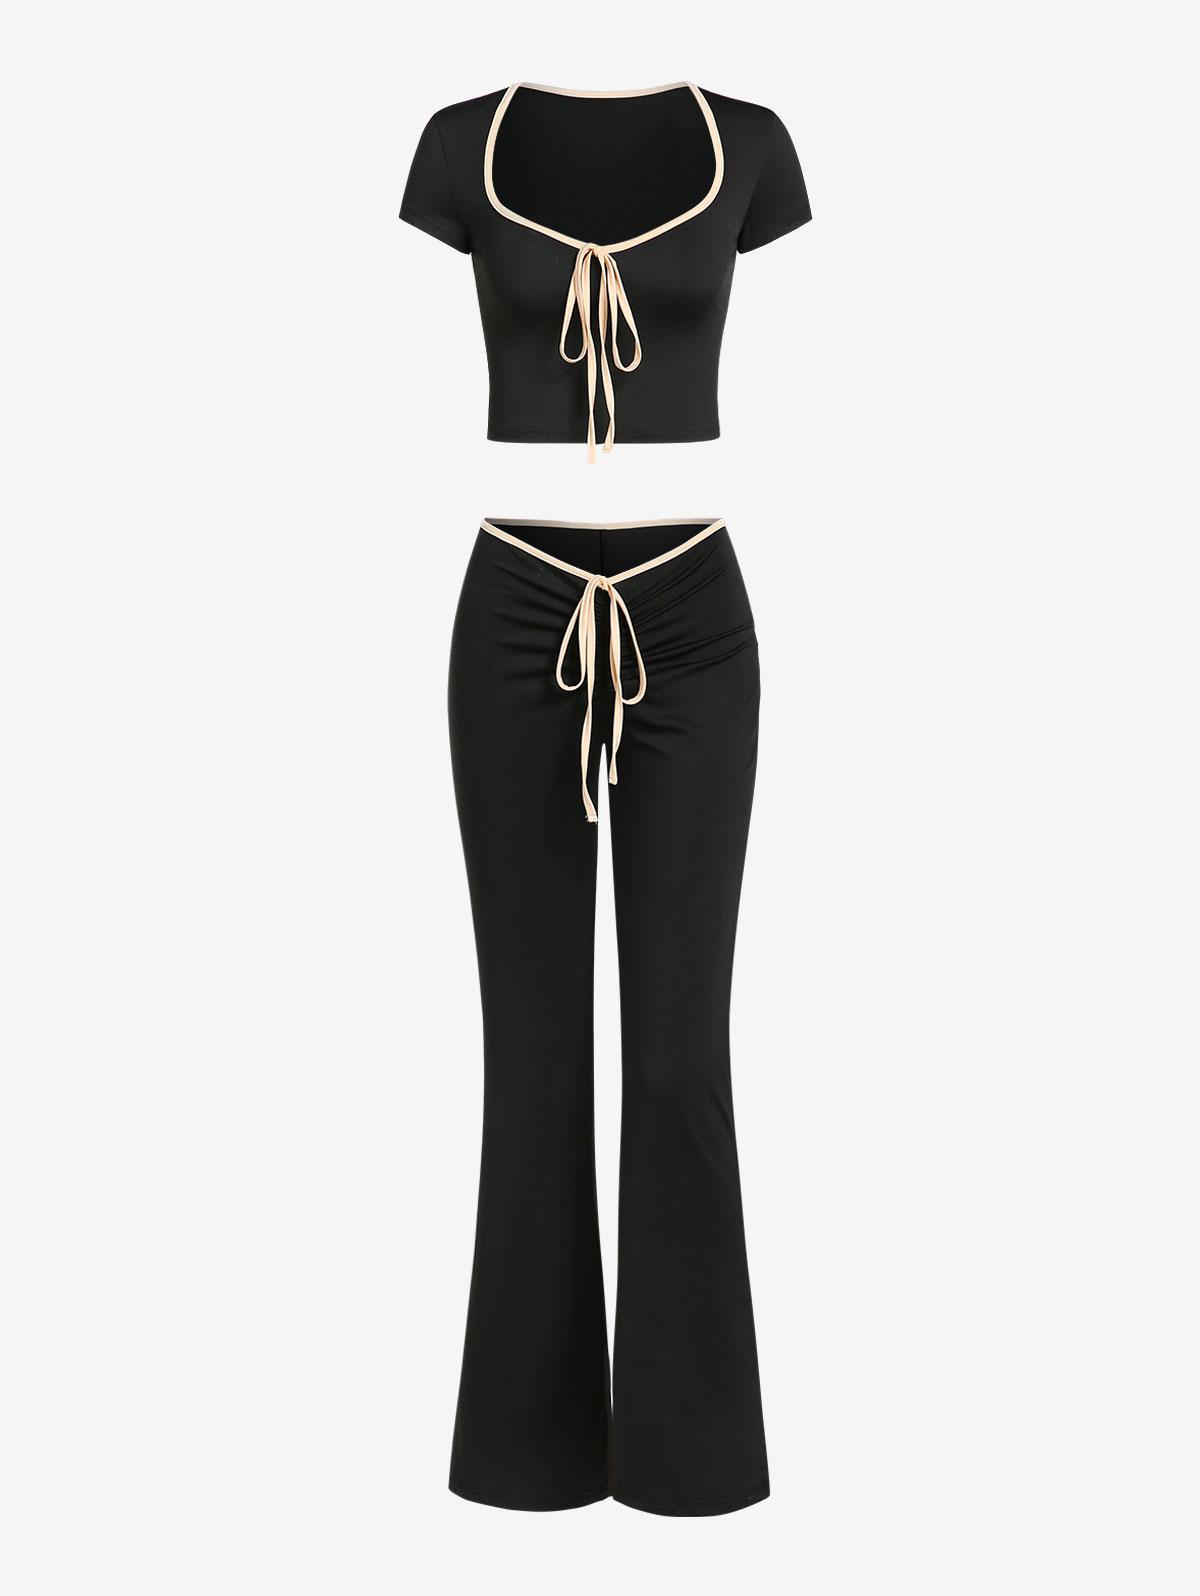 Women's Going Out Tie Front Cinched Contrast Piping Short Sleeves Slim Fit Crop T Shirt Low Waist Bell Bottoms Pants Two Piece Set S Black